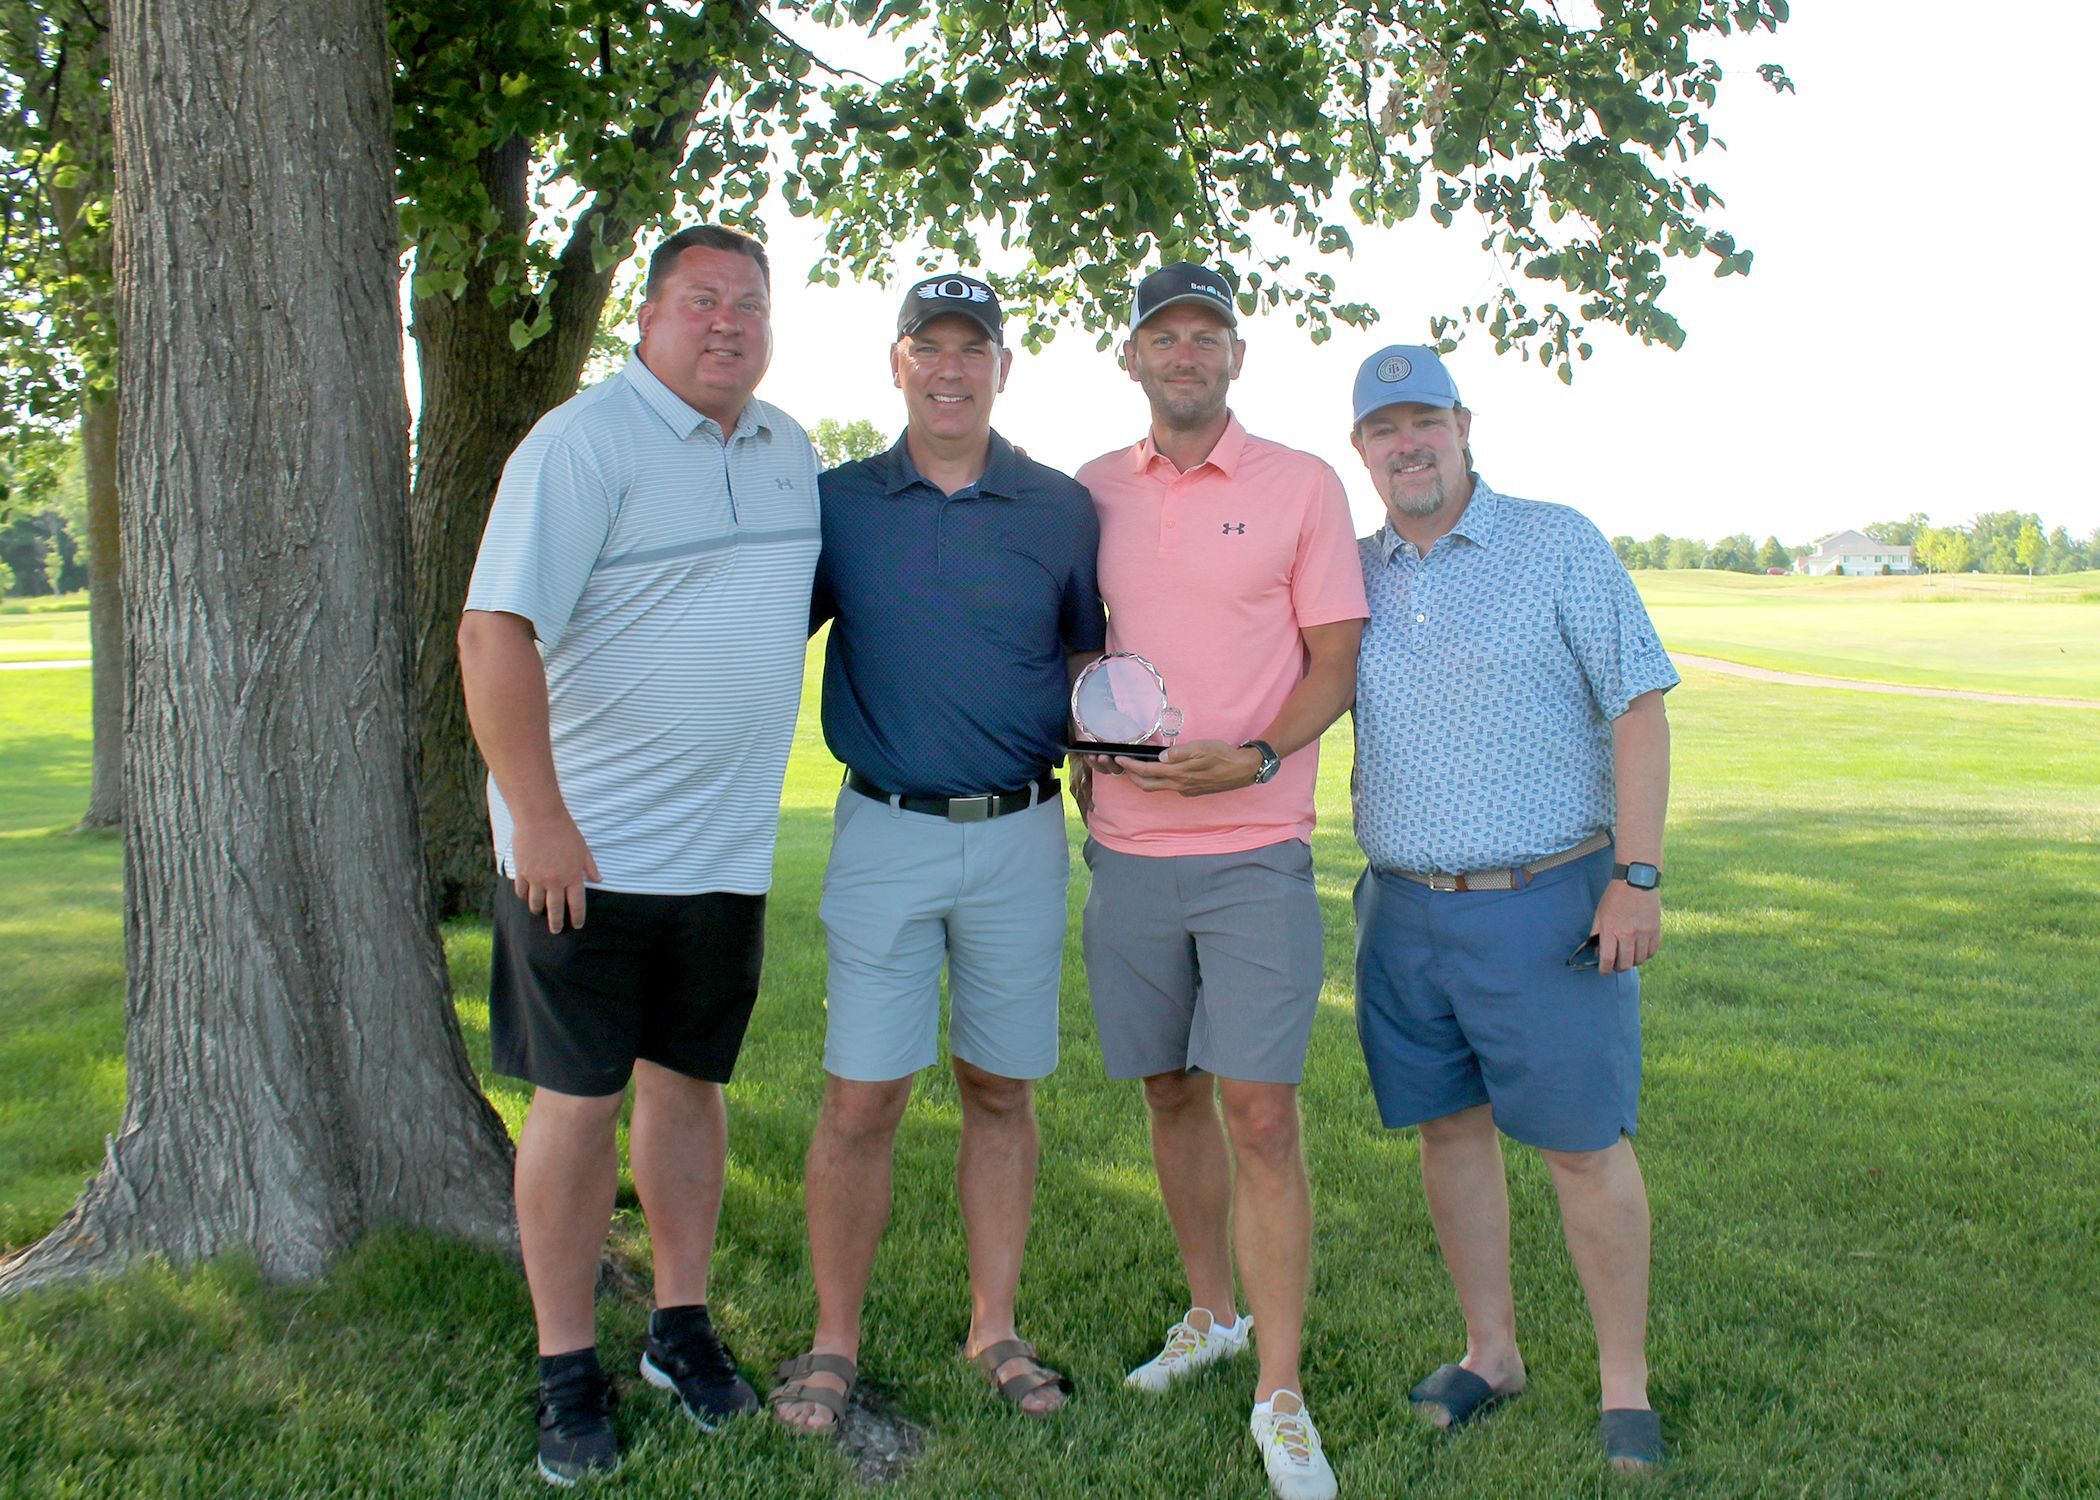 Team Bell Bank - 2023 Golf Classic Champions. Trevor Peterson, Jeff Patience, Andrew Holte & John Hoven